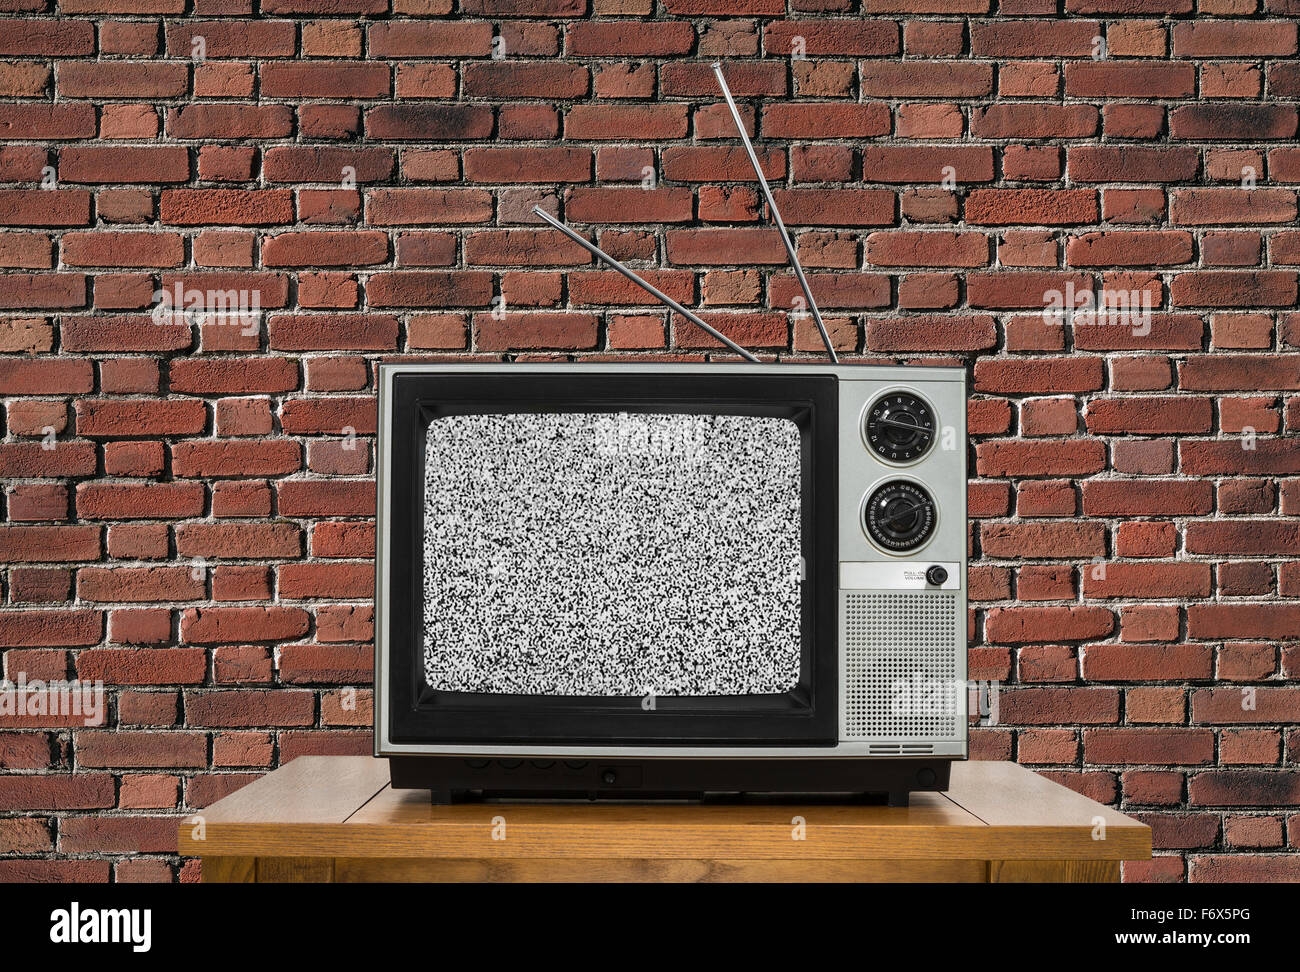 Old analogue television with static screen and brick wall. Stock Photo